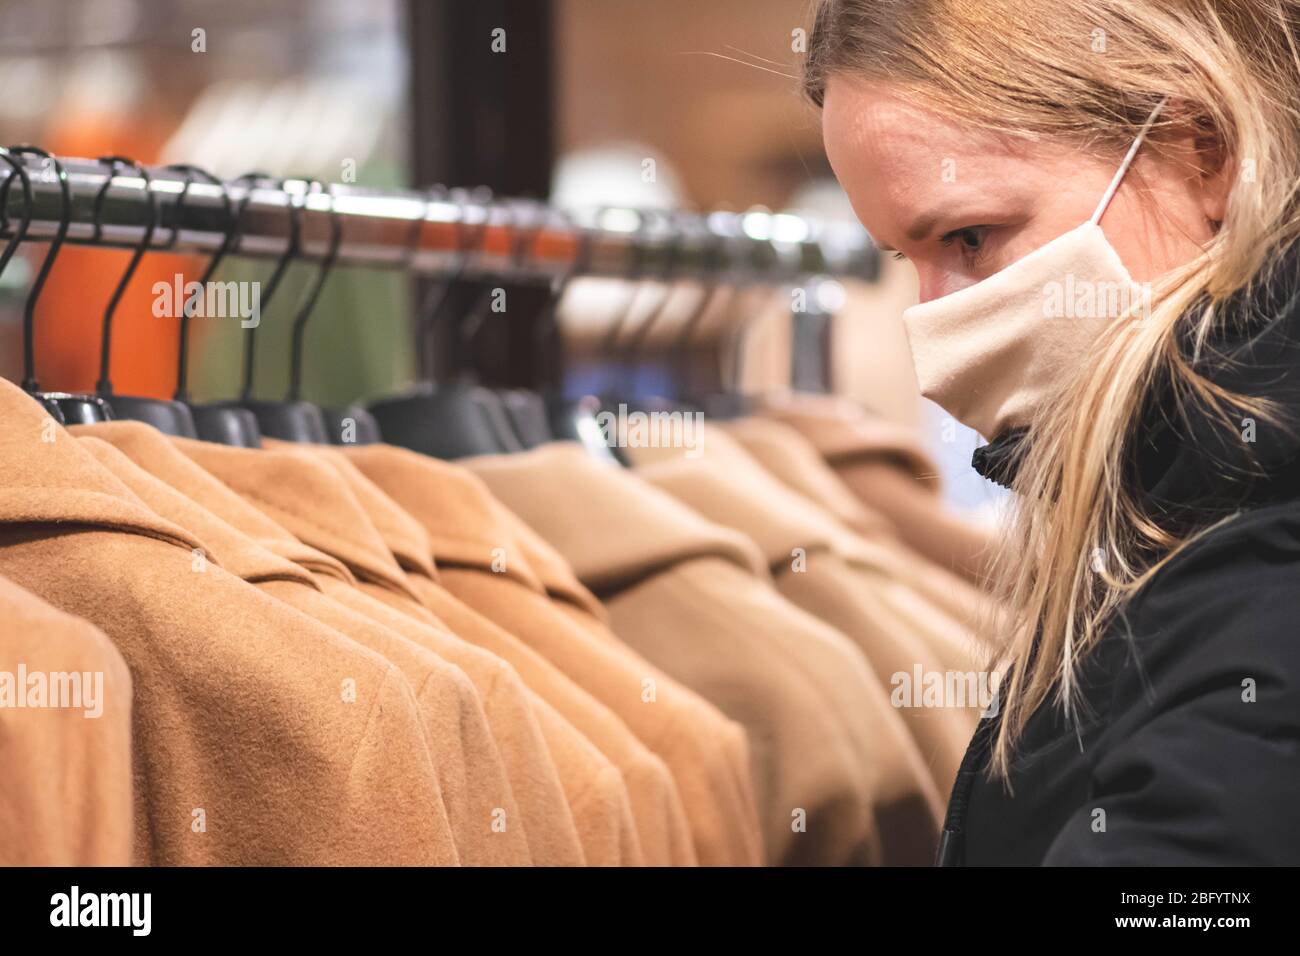 Blond girl in a shop with mask and plastic gloves, shopping during covid or coronavirus lockdown Stock Photo